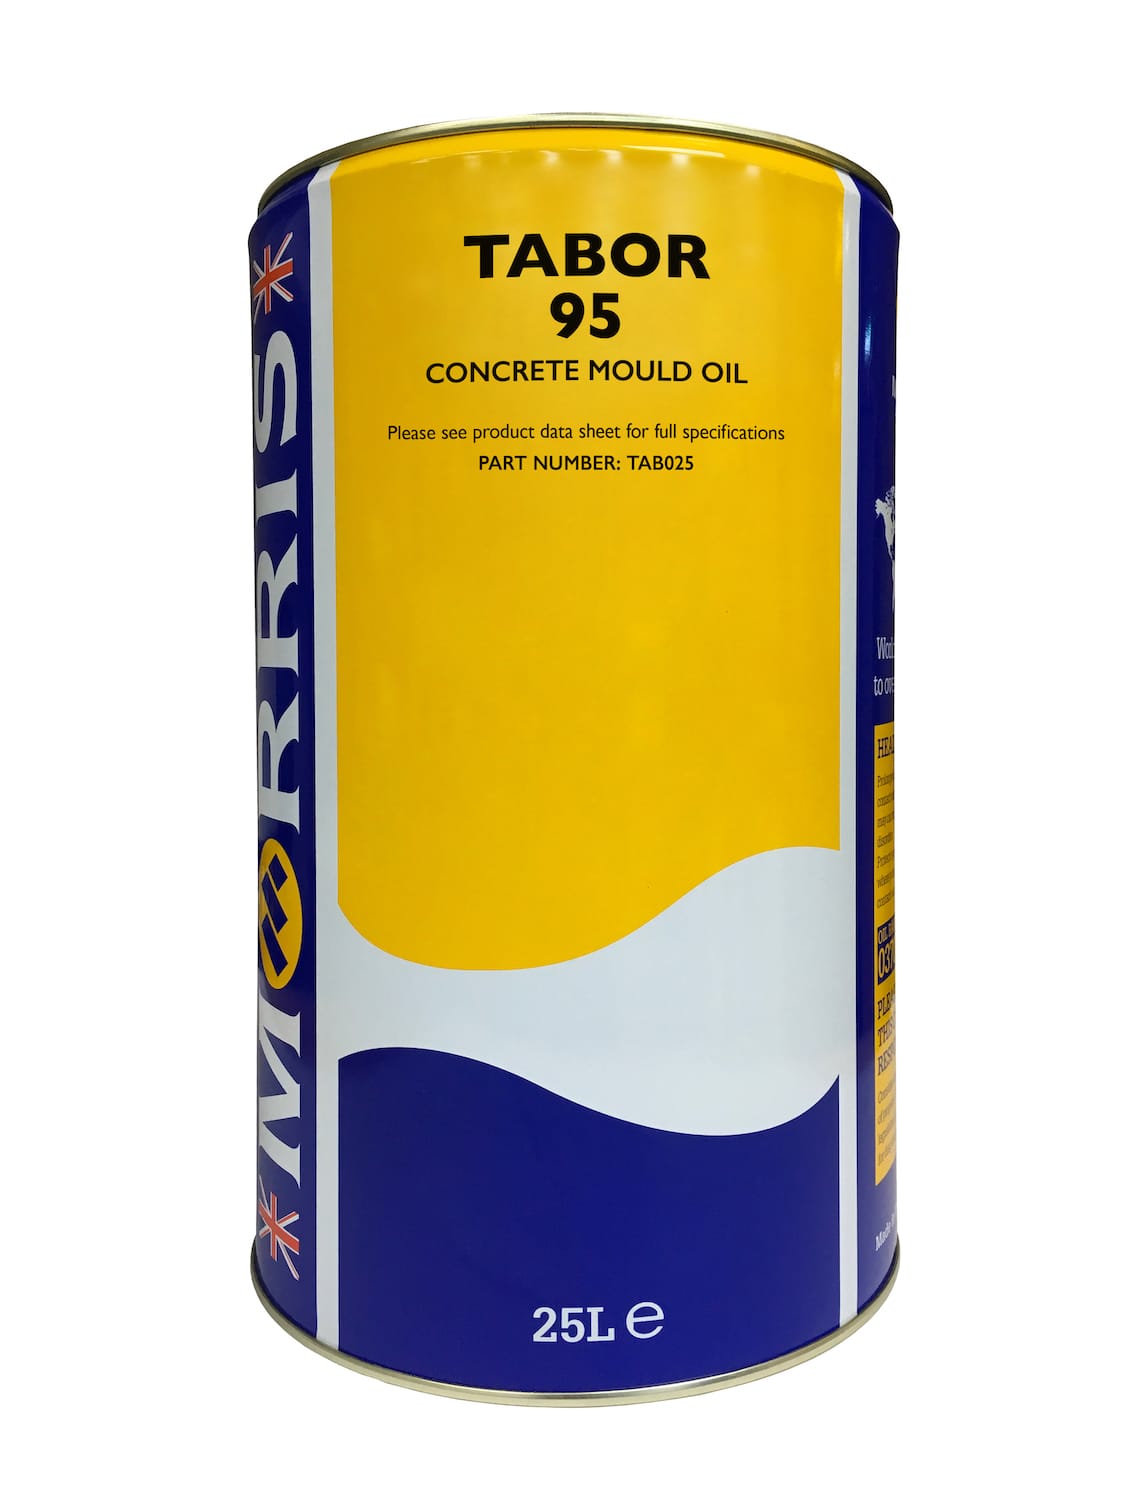 Tabor 95 Mould Oil